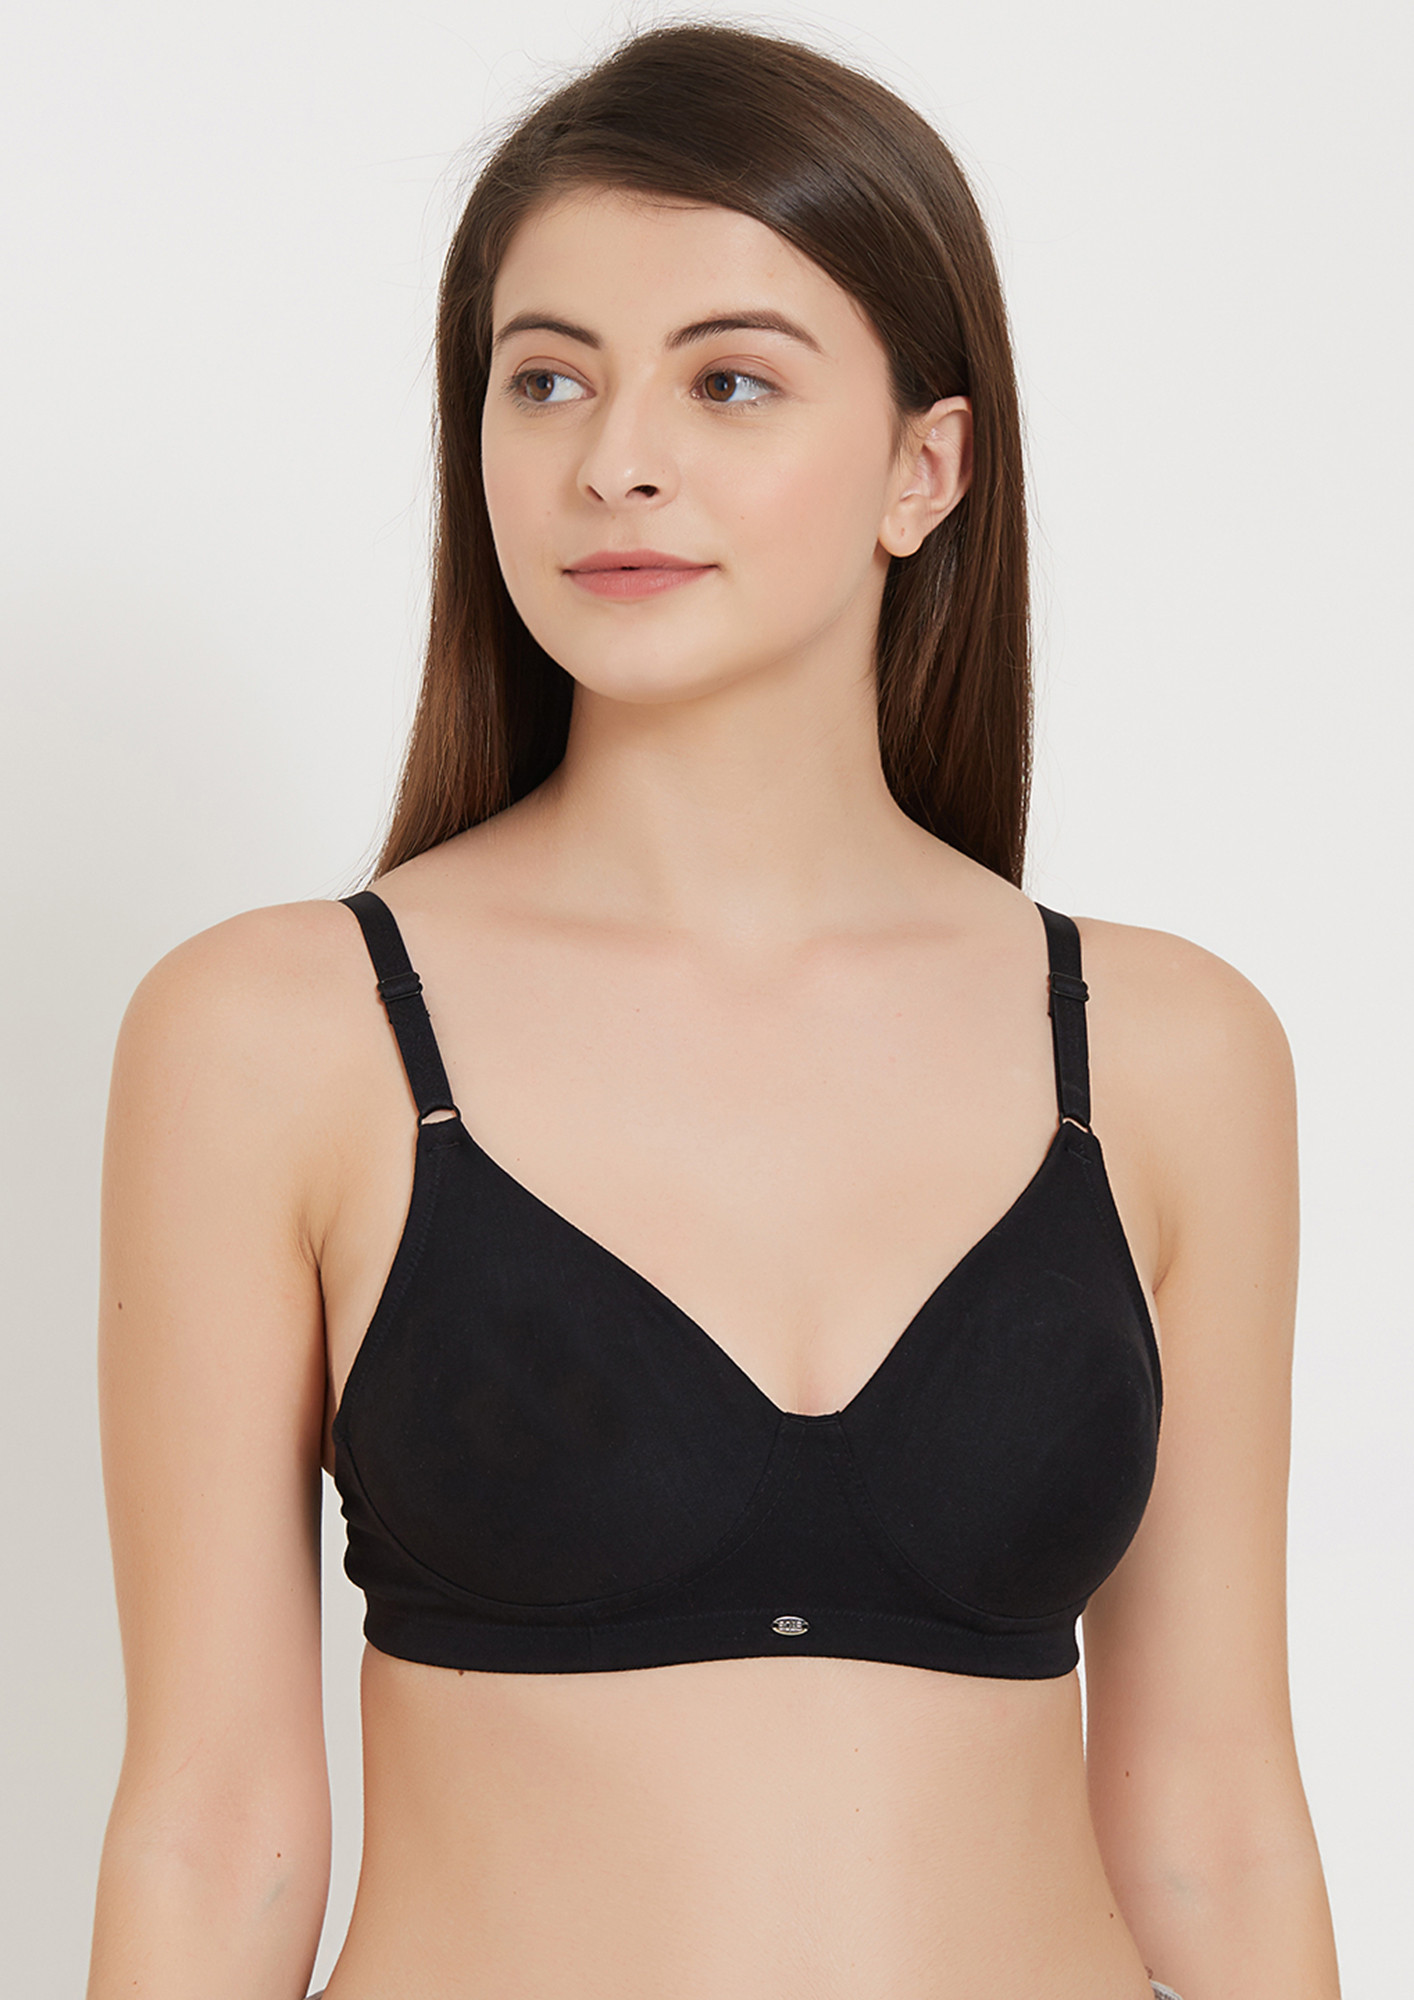 SOIE Black Women's Full Coverage Seamless Cup Non-Wired Bra